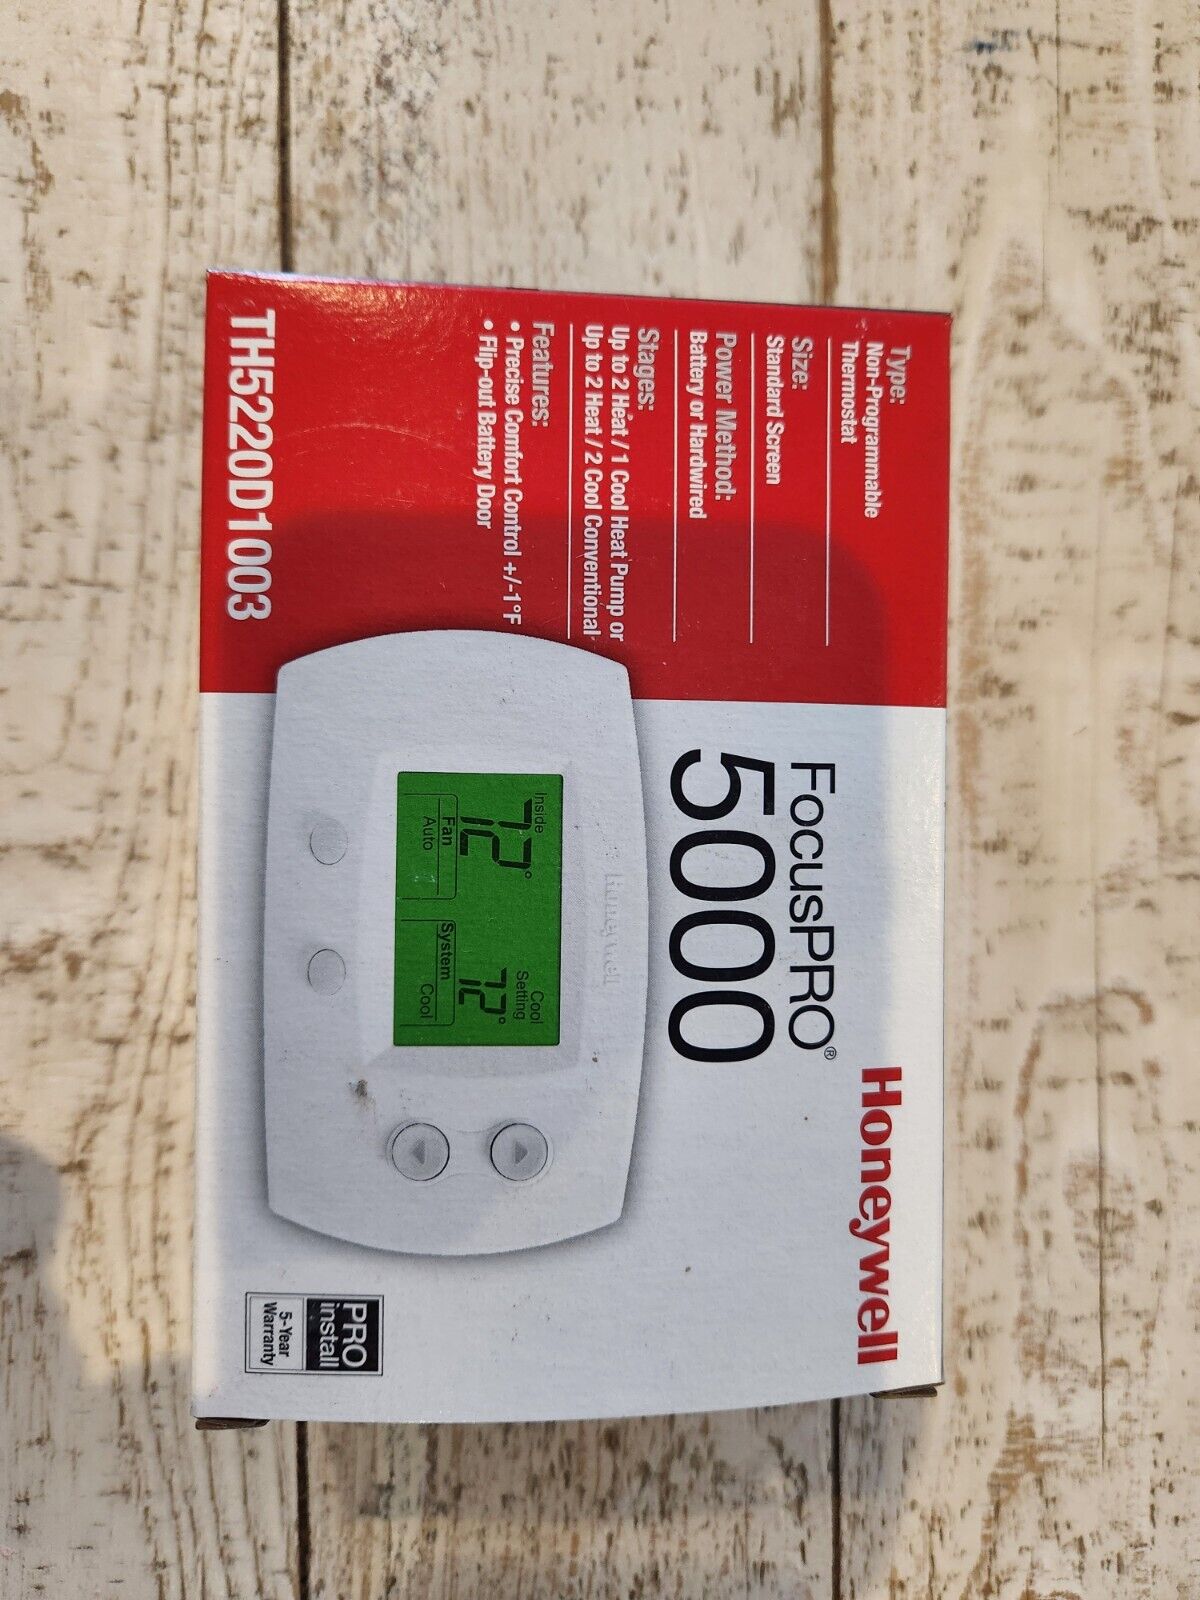 Honeywell TH5220D1003 Low Voltage Wall Thermostat